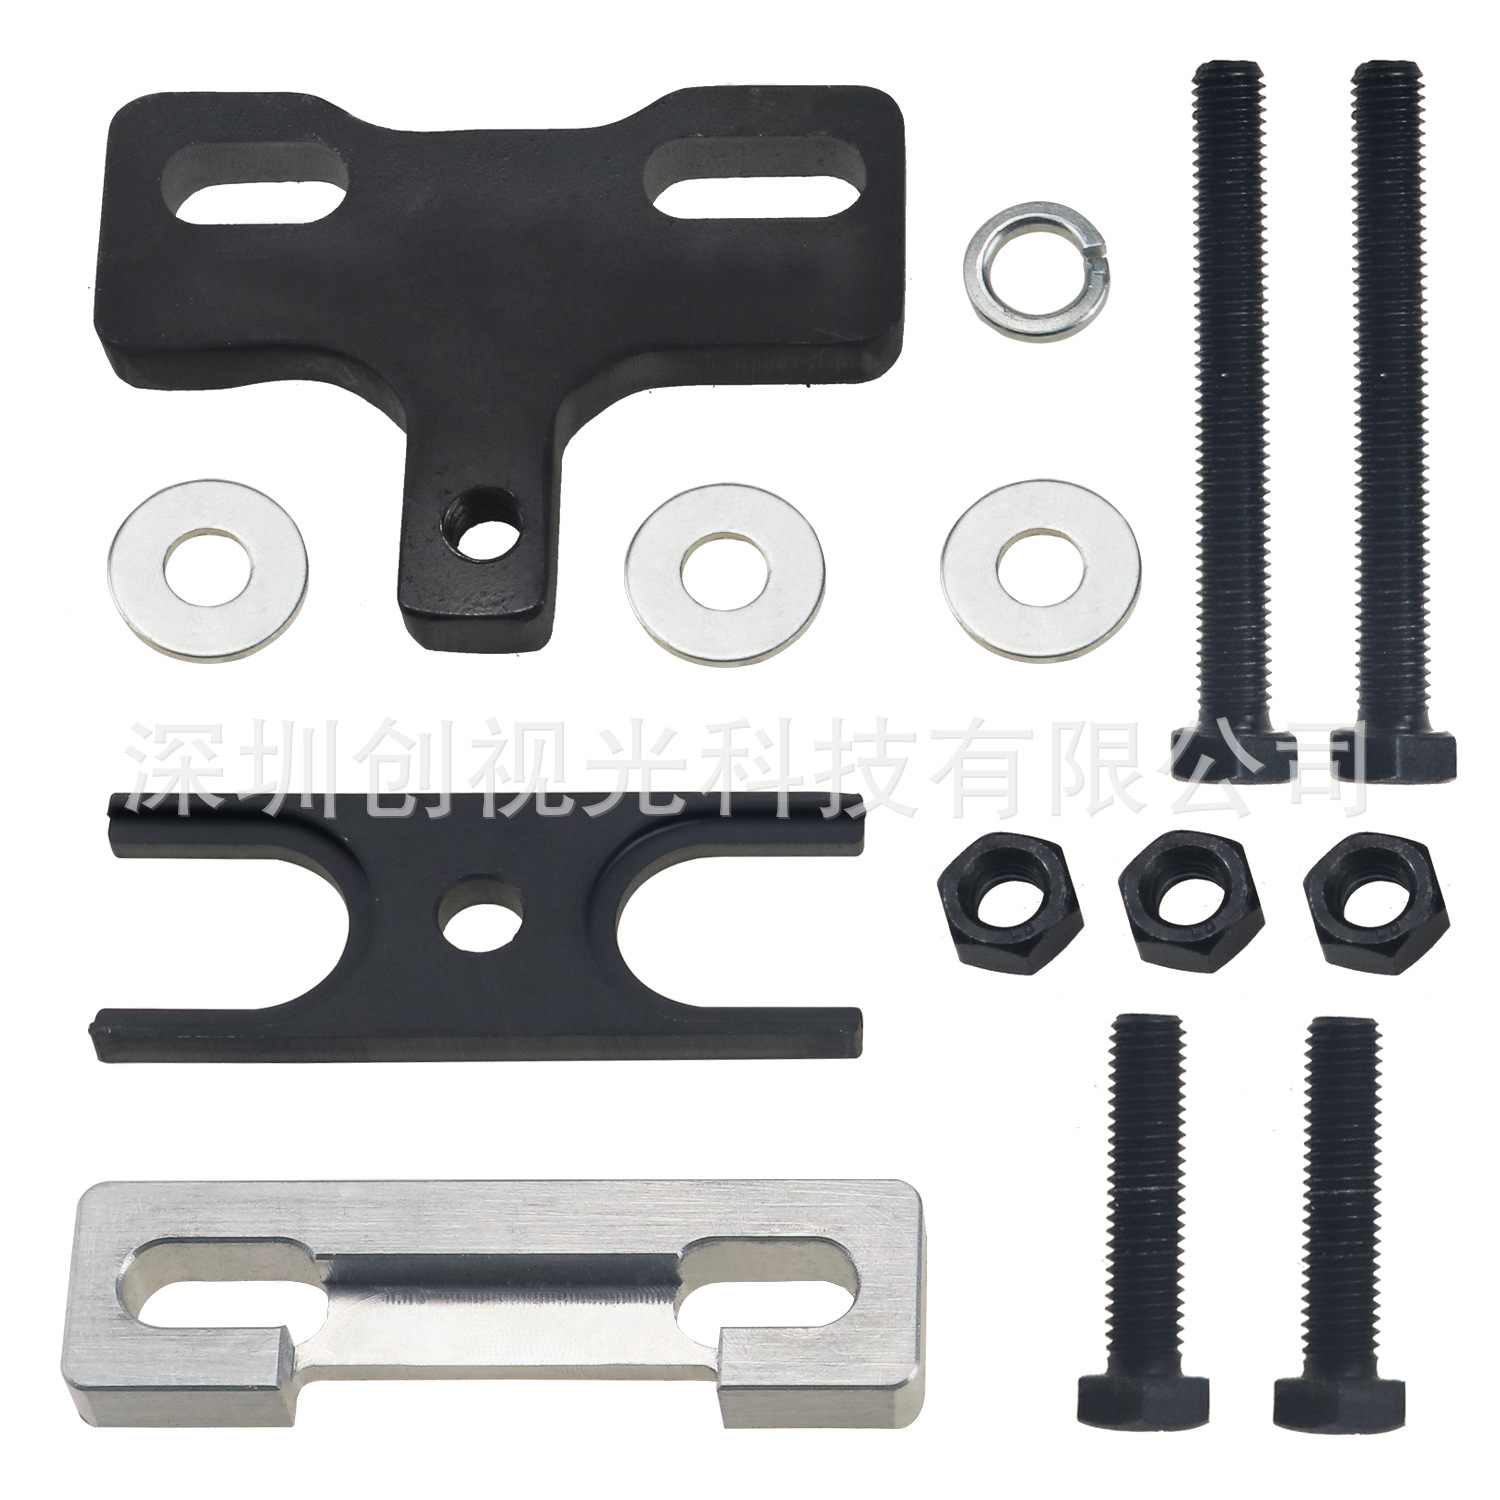  applicable to LSX 4.8 5.3 5.7 6.0 6.2 LS valve spring compressor tool bargaining